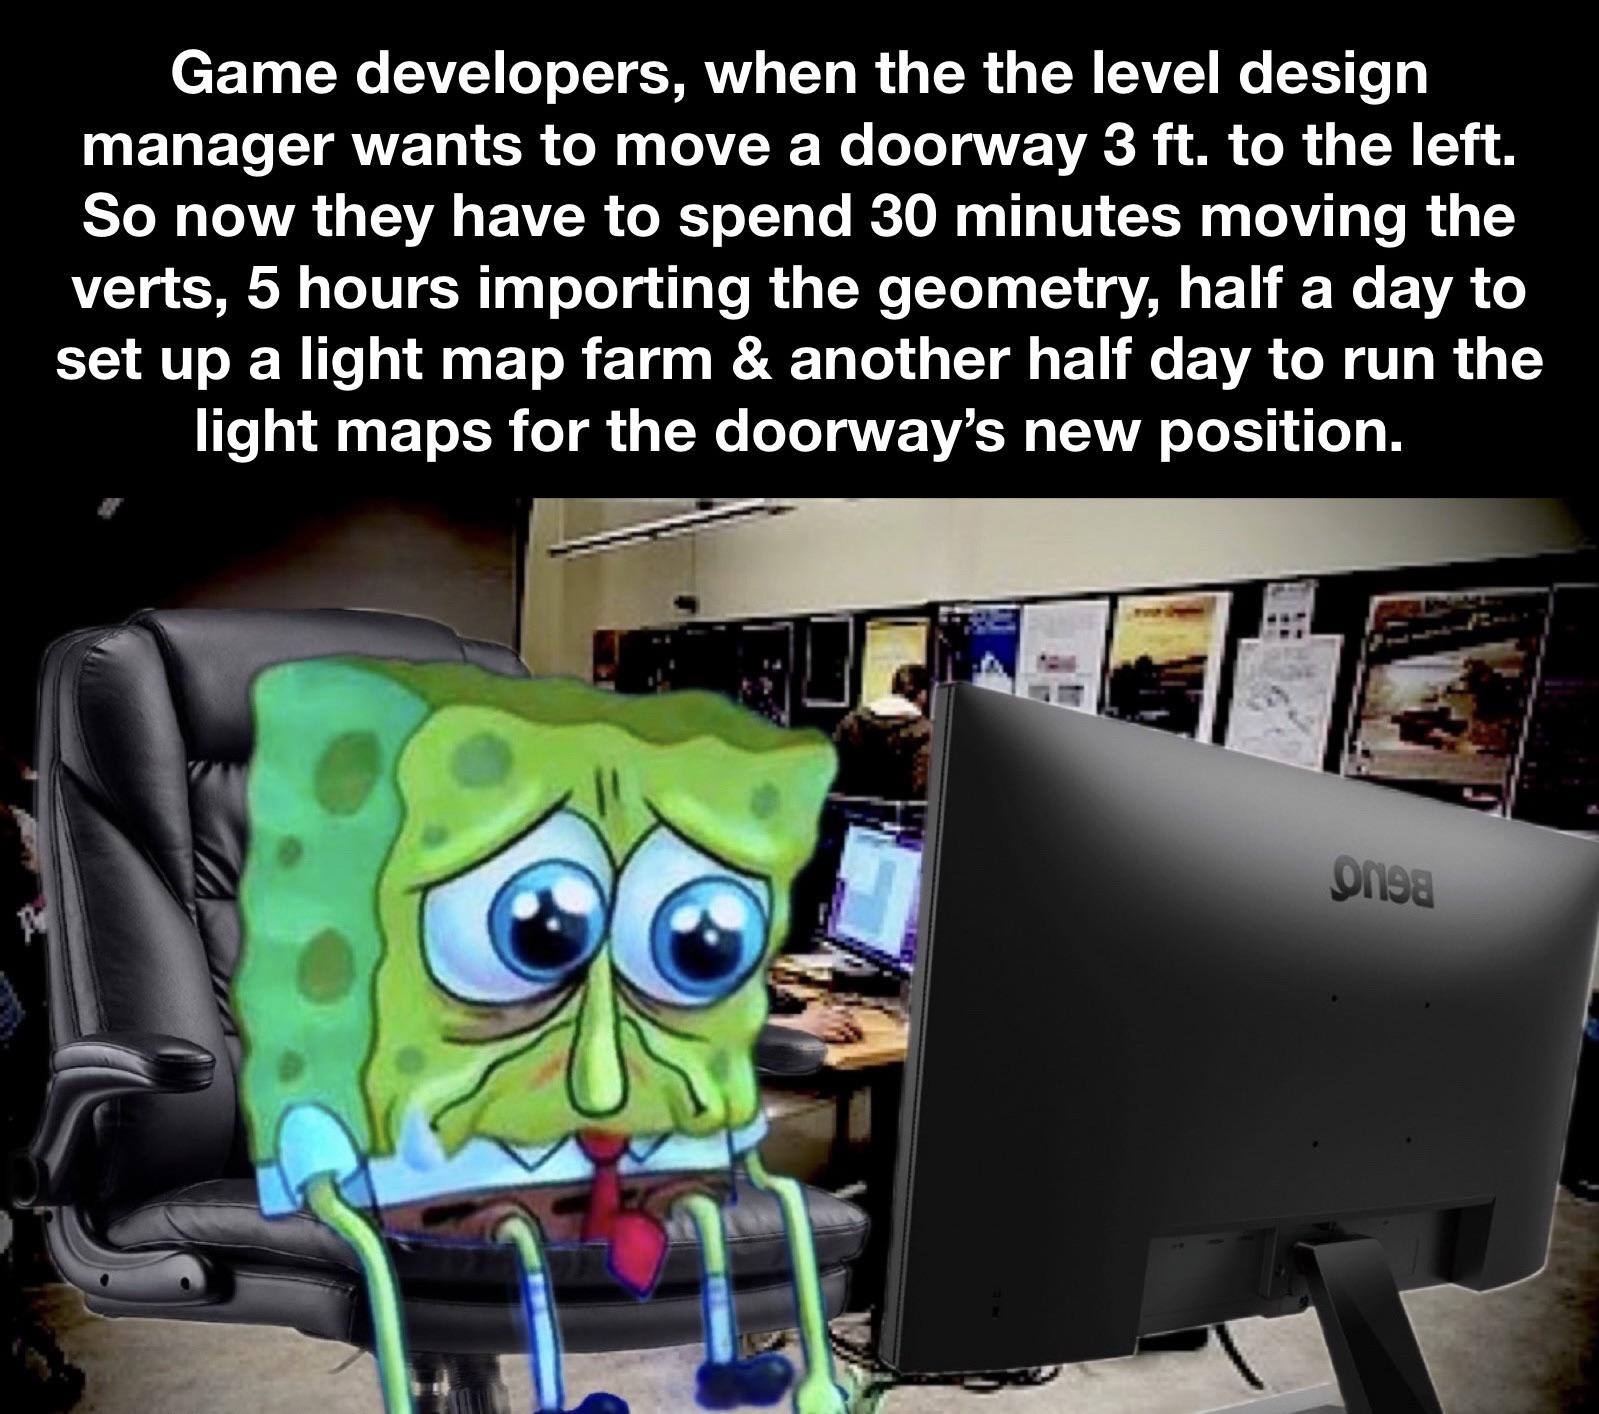 dank memes - multimedia - Game developers, when the the level design manager wants to move a doorway 3 ft. to the left. So now they have to spend 30 minutes moving the verts, 5 hours importing the geometry, half a day to set up a light map farm & another 